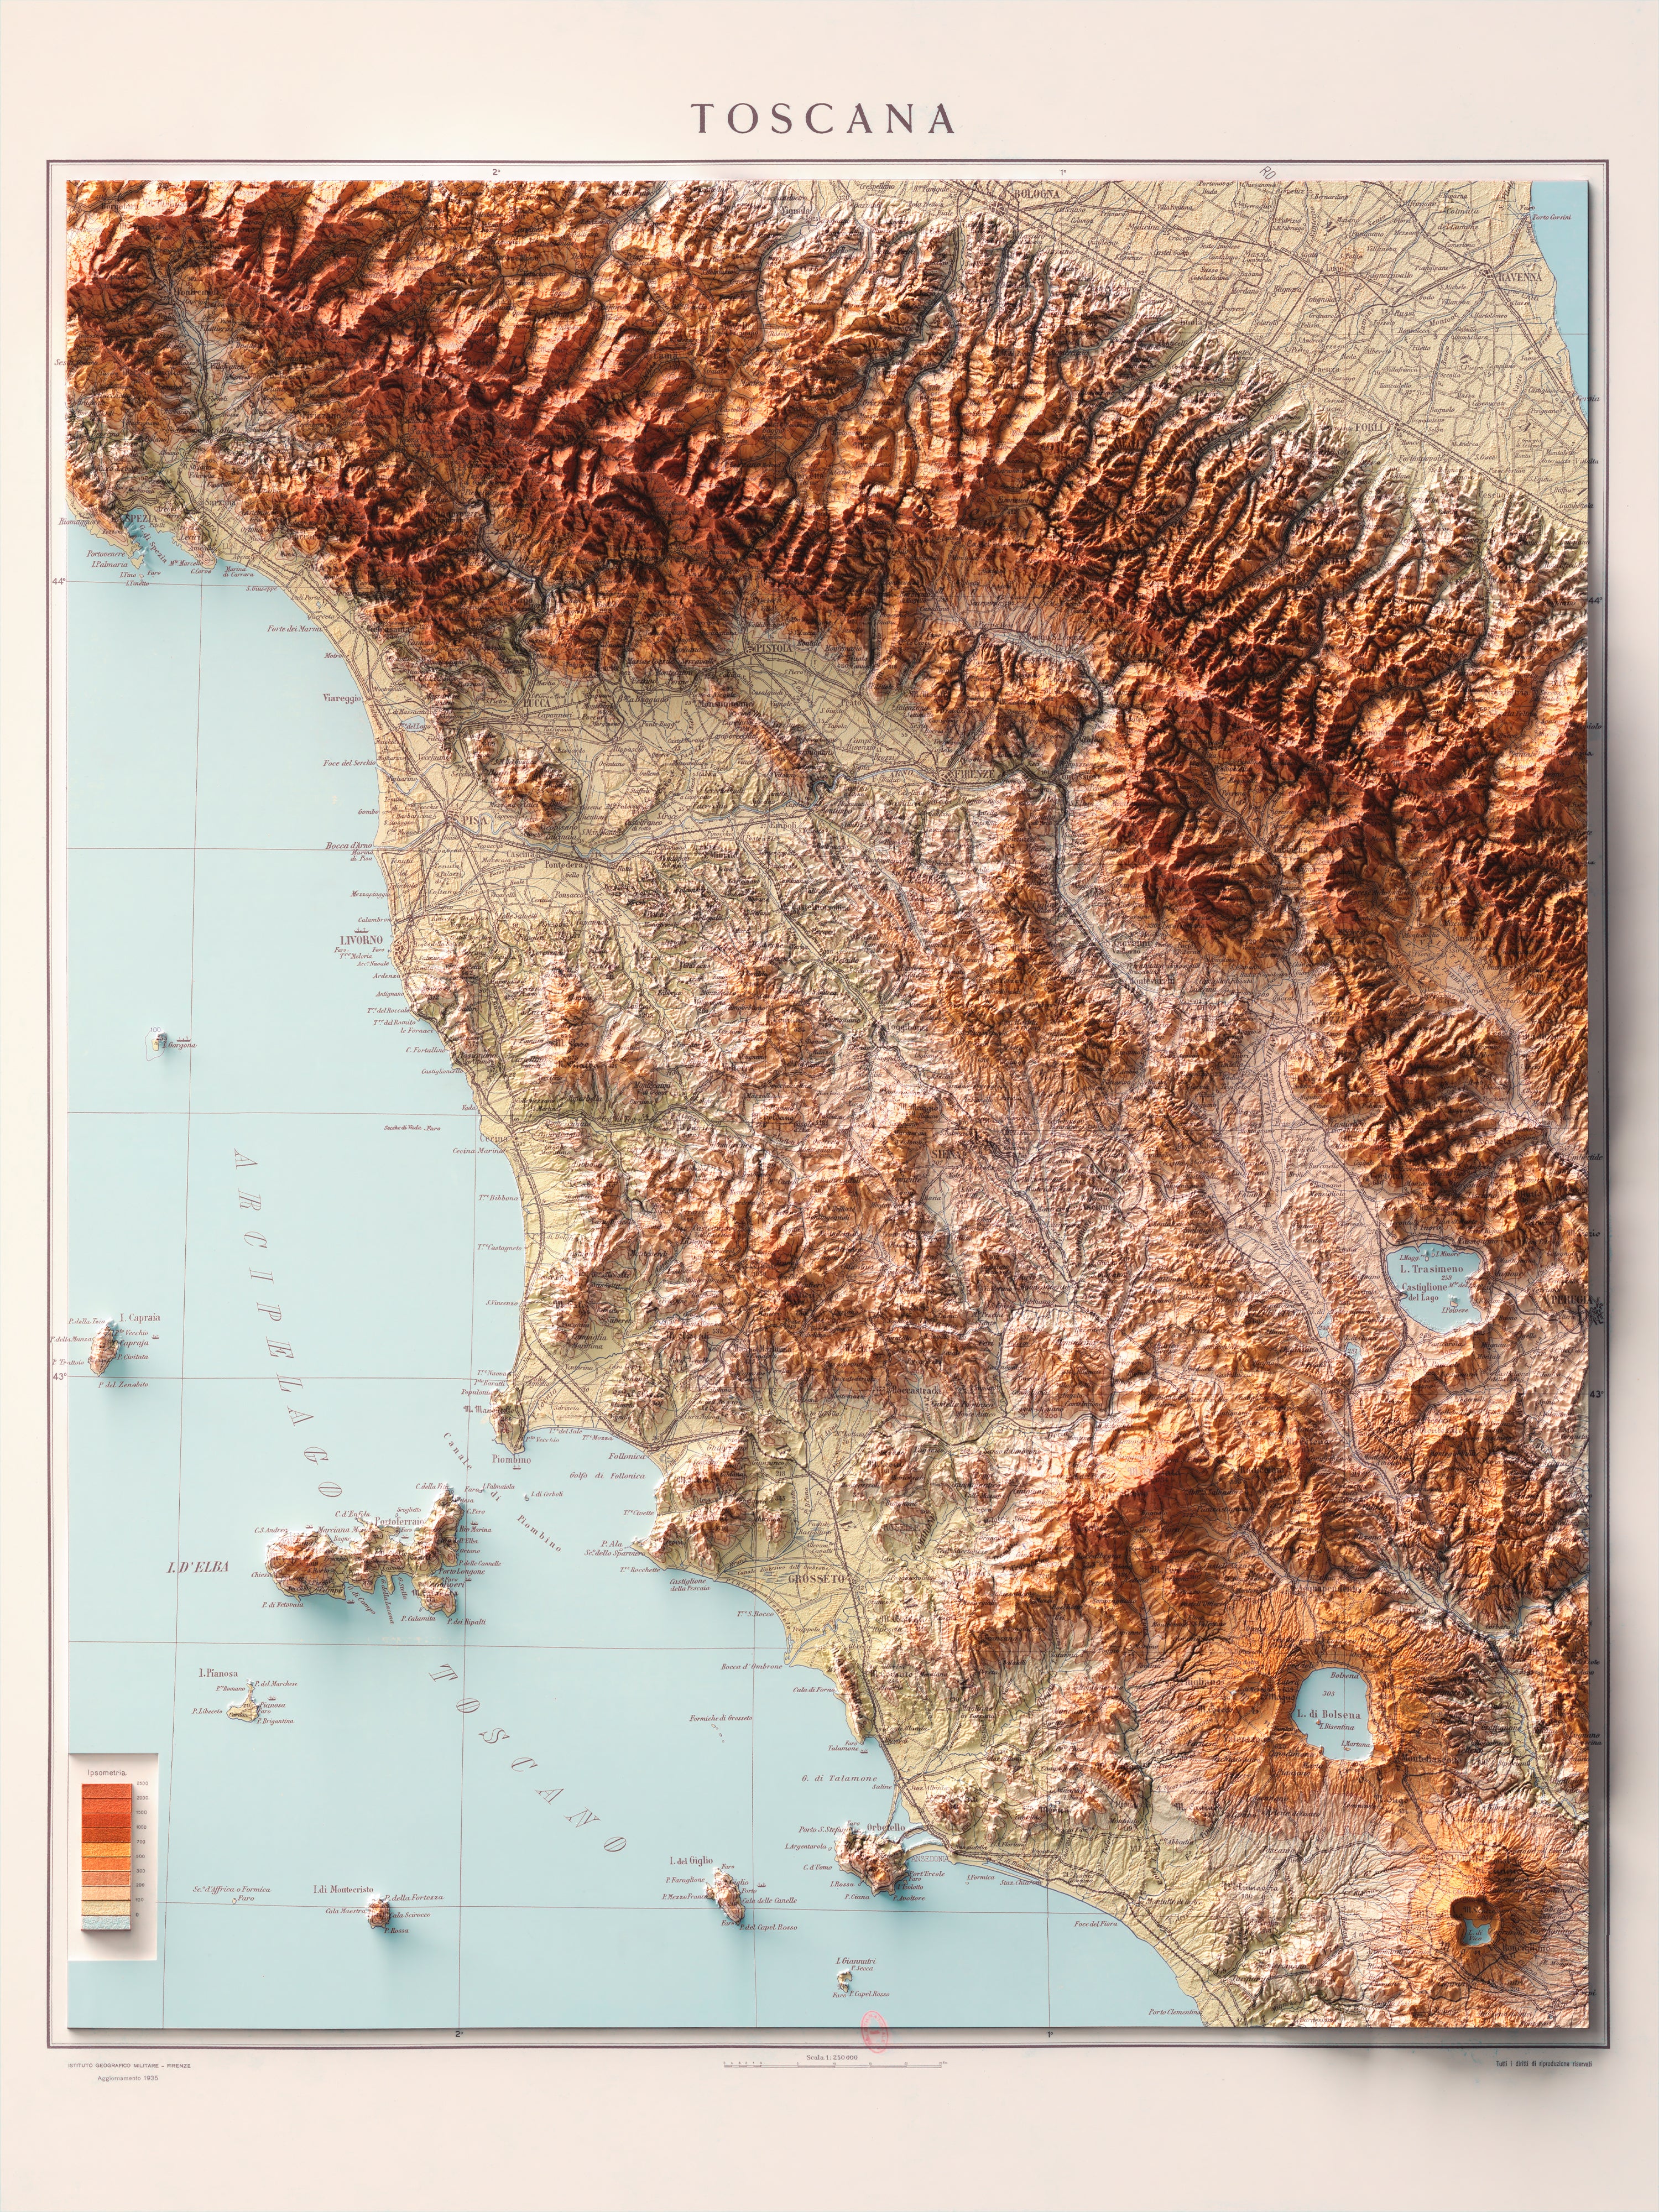 Tuscany topographic map 1935, shaded relief map